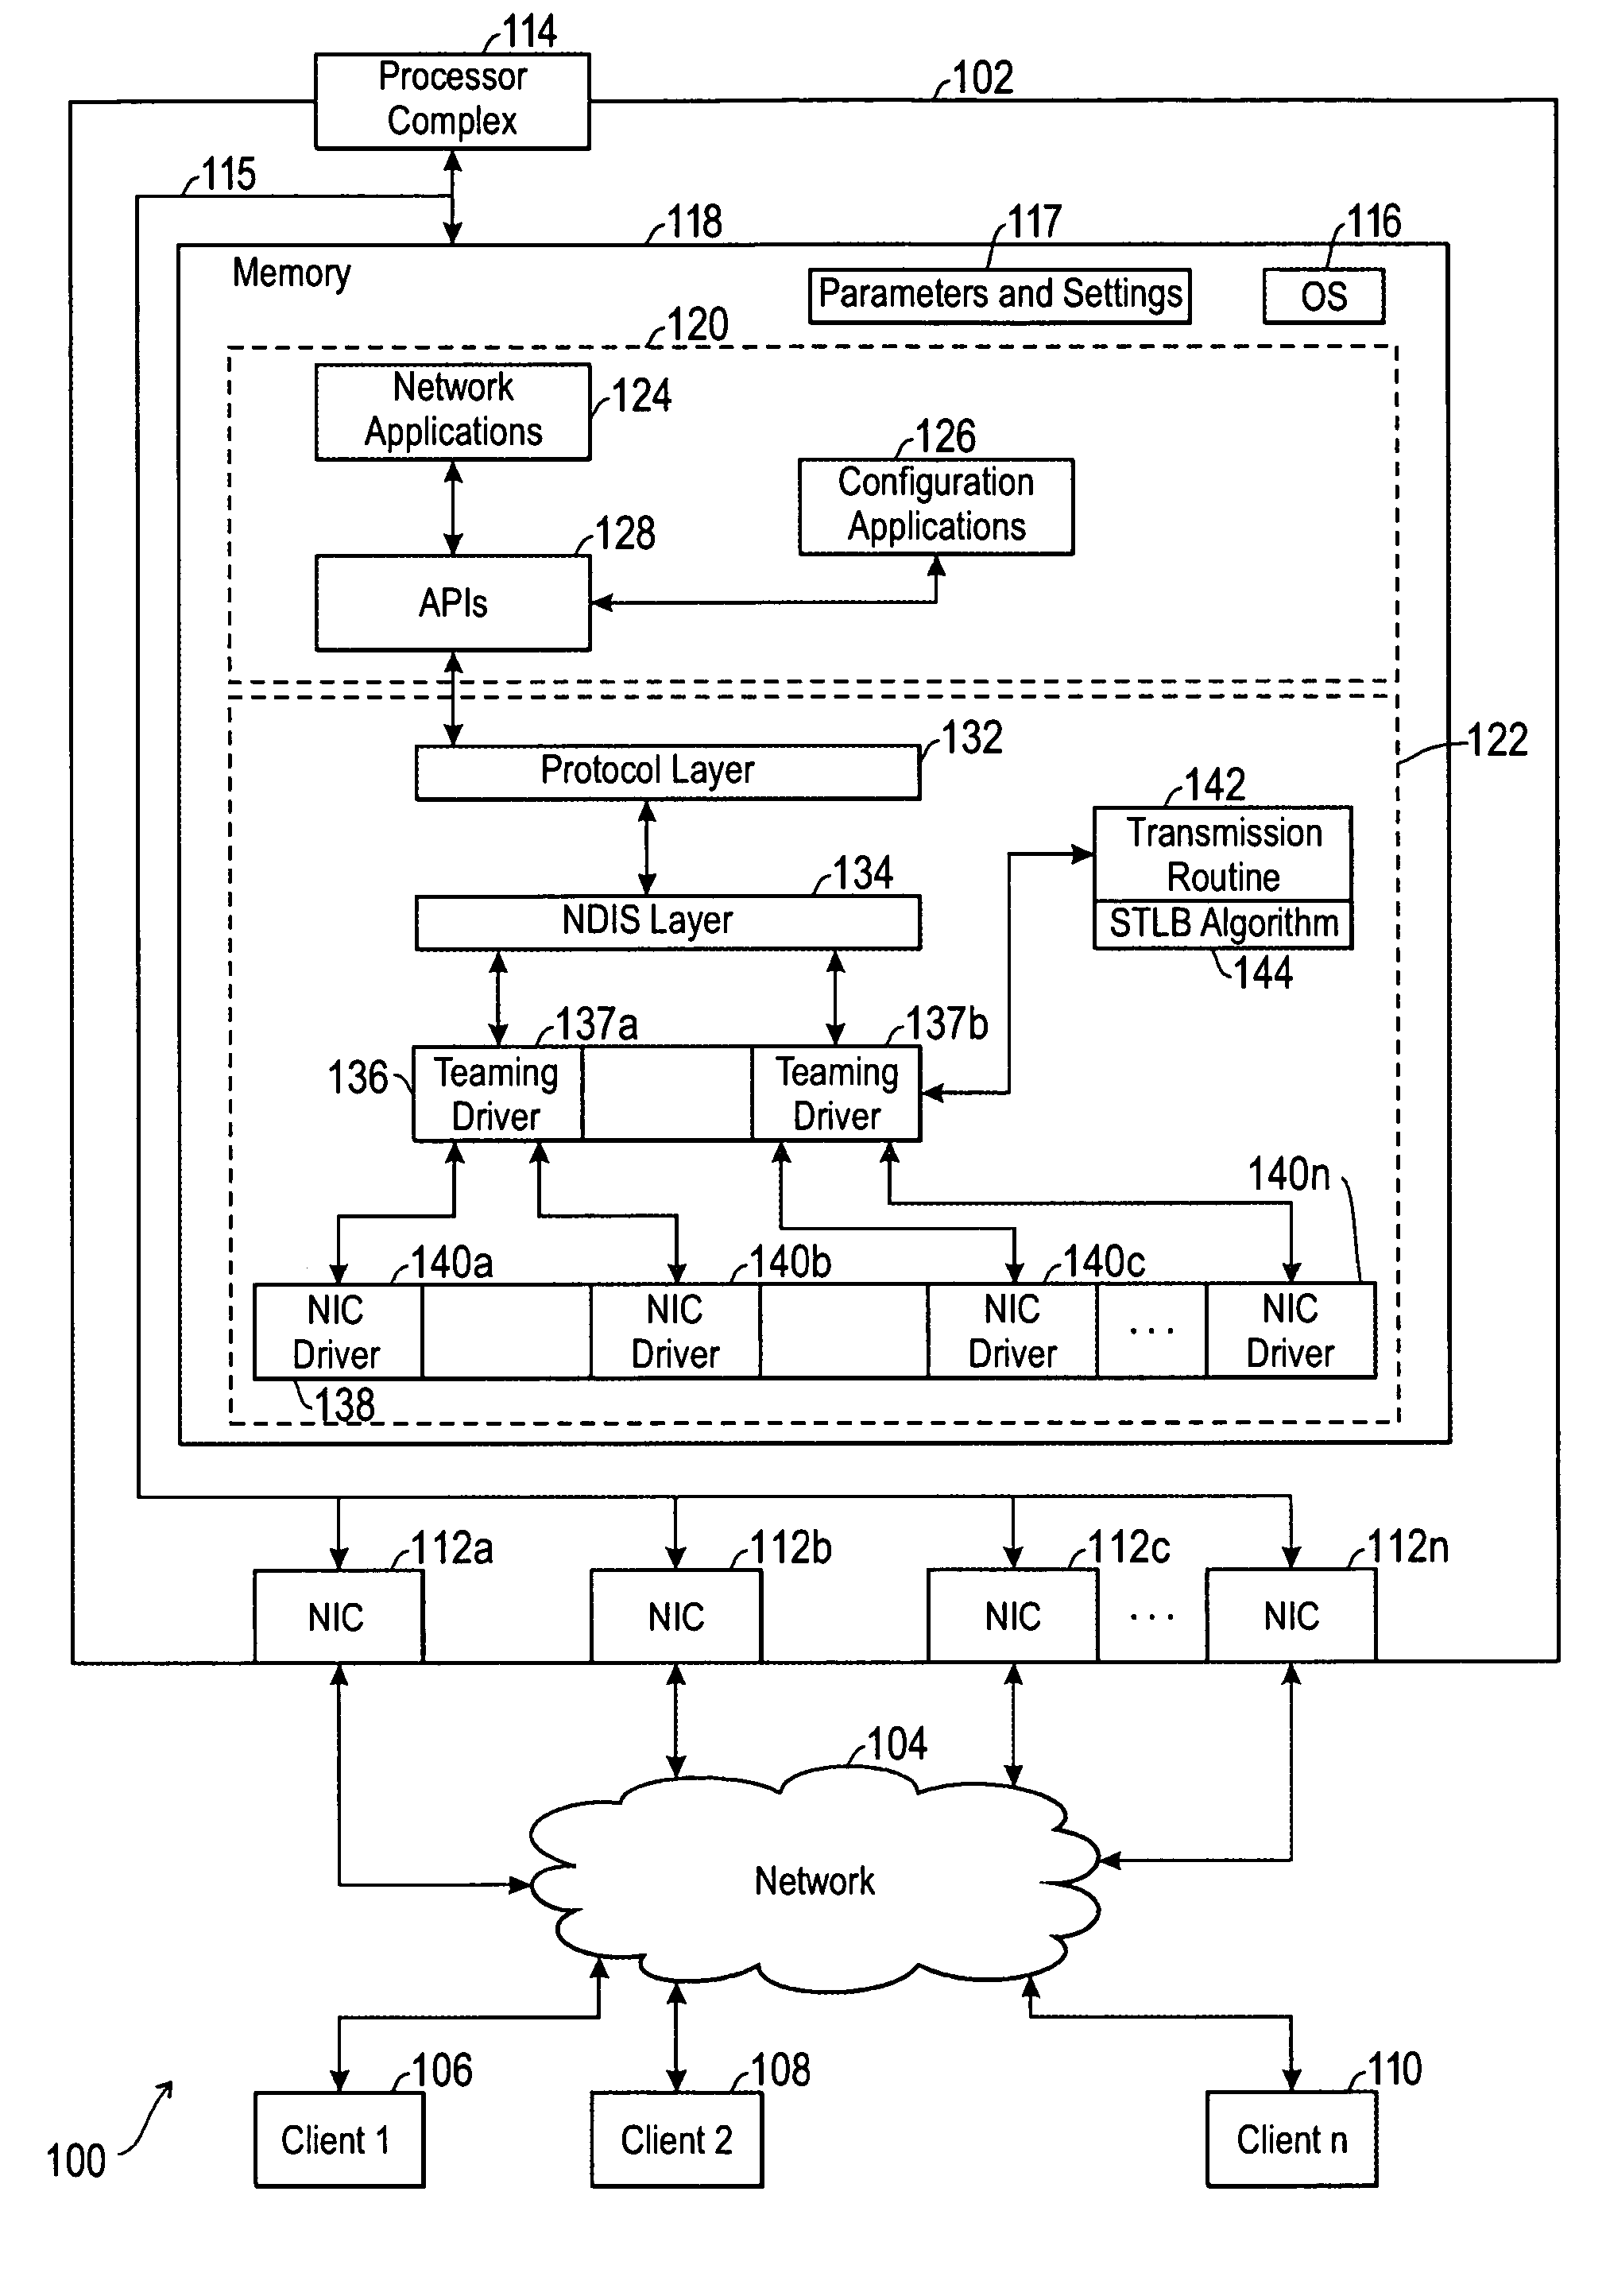 Method and apparatus for load balancing network interface adapters based on network information